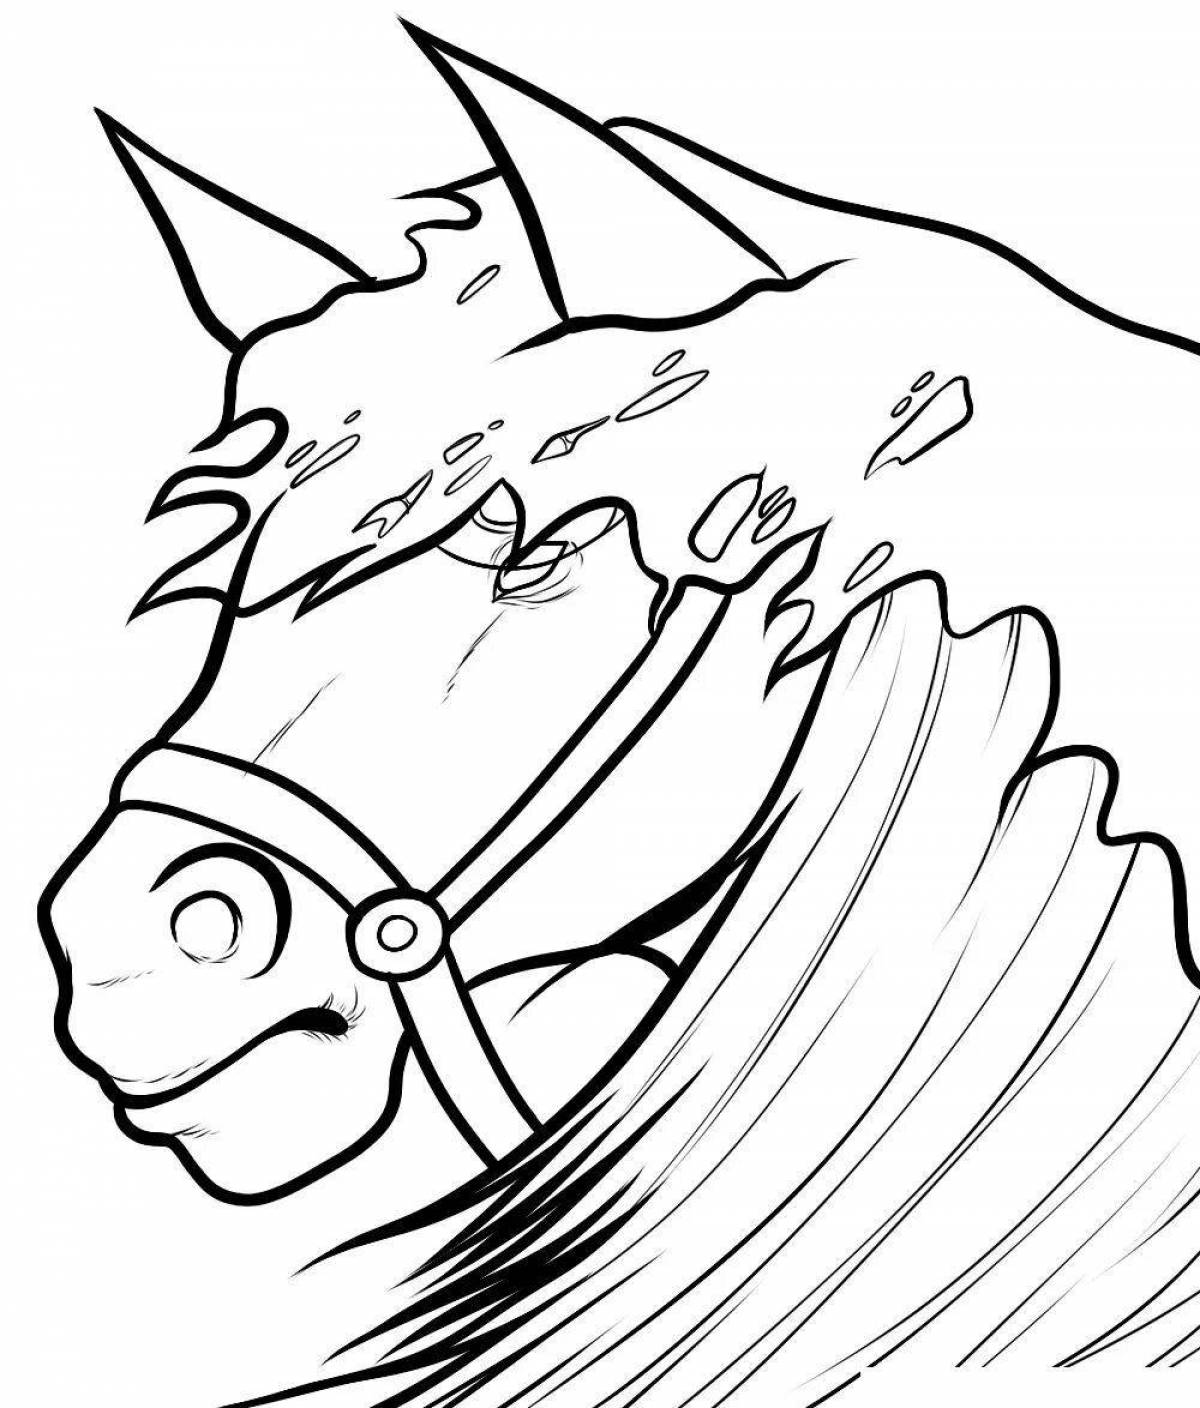 Amazing horse head coloring book